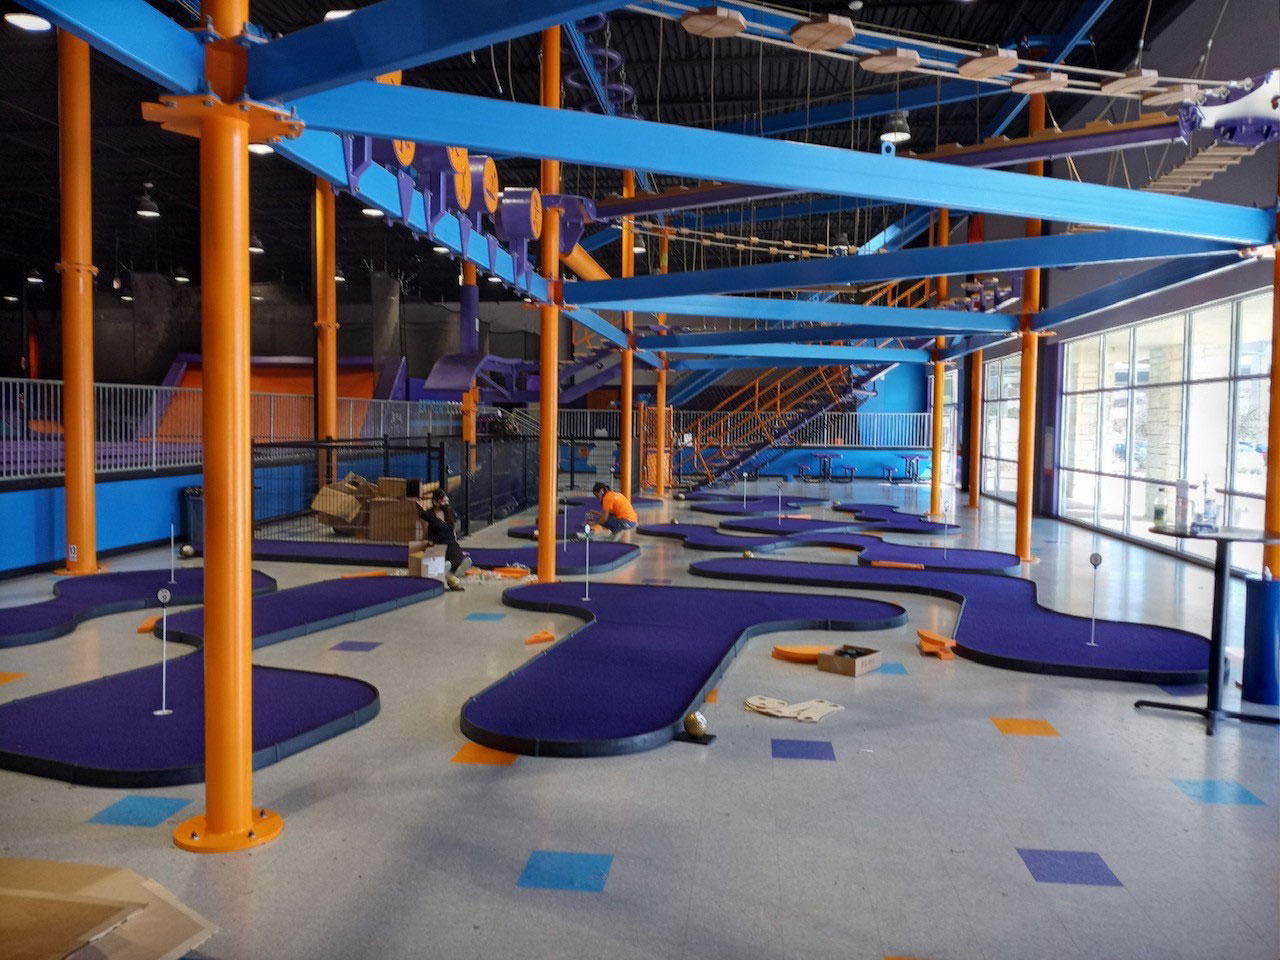 An Altitude Trampoline Park worker sorts orange obstacles to place on the purple turf of the MiniLinks miniature golf course